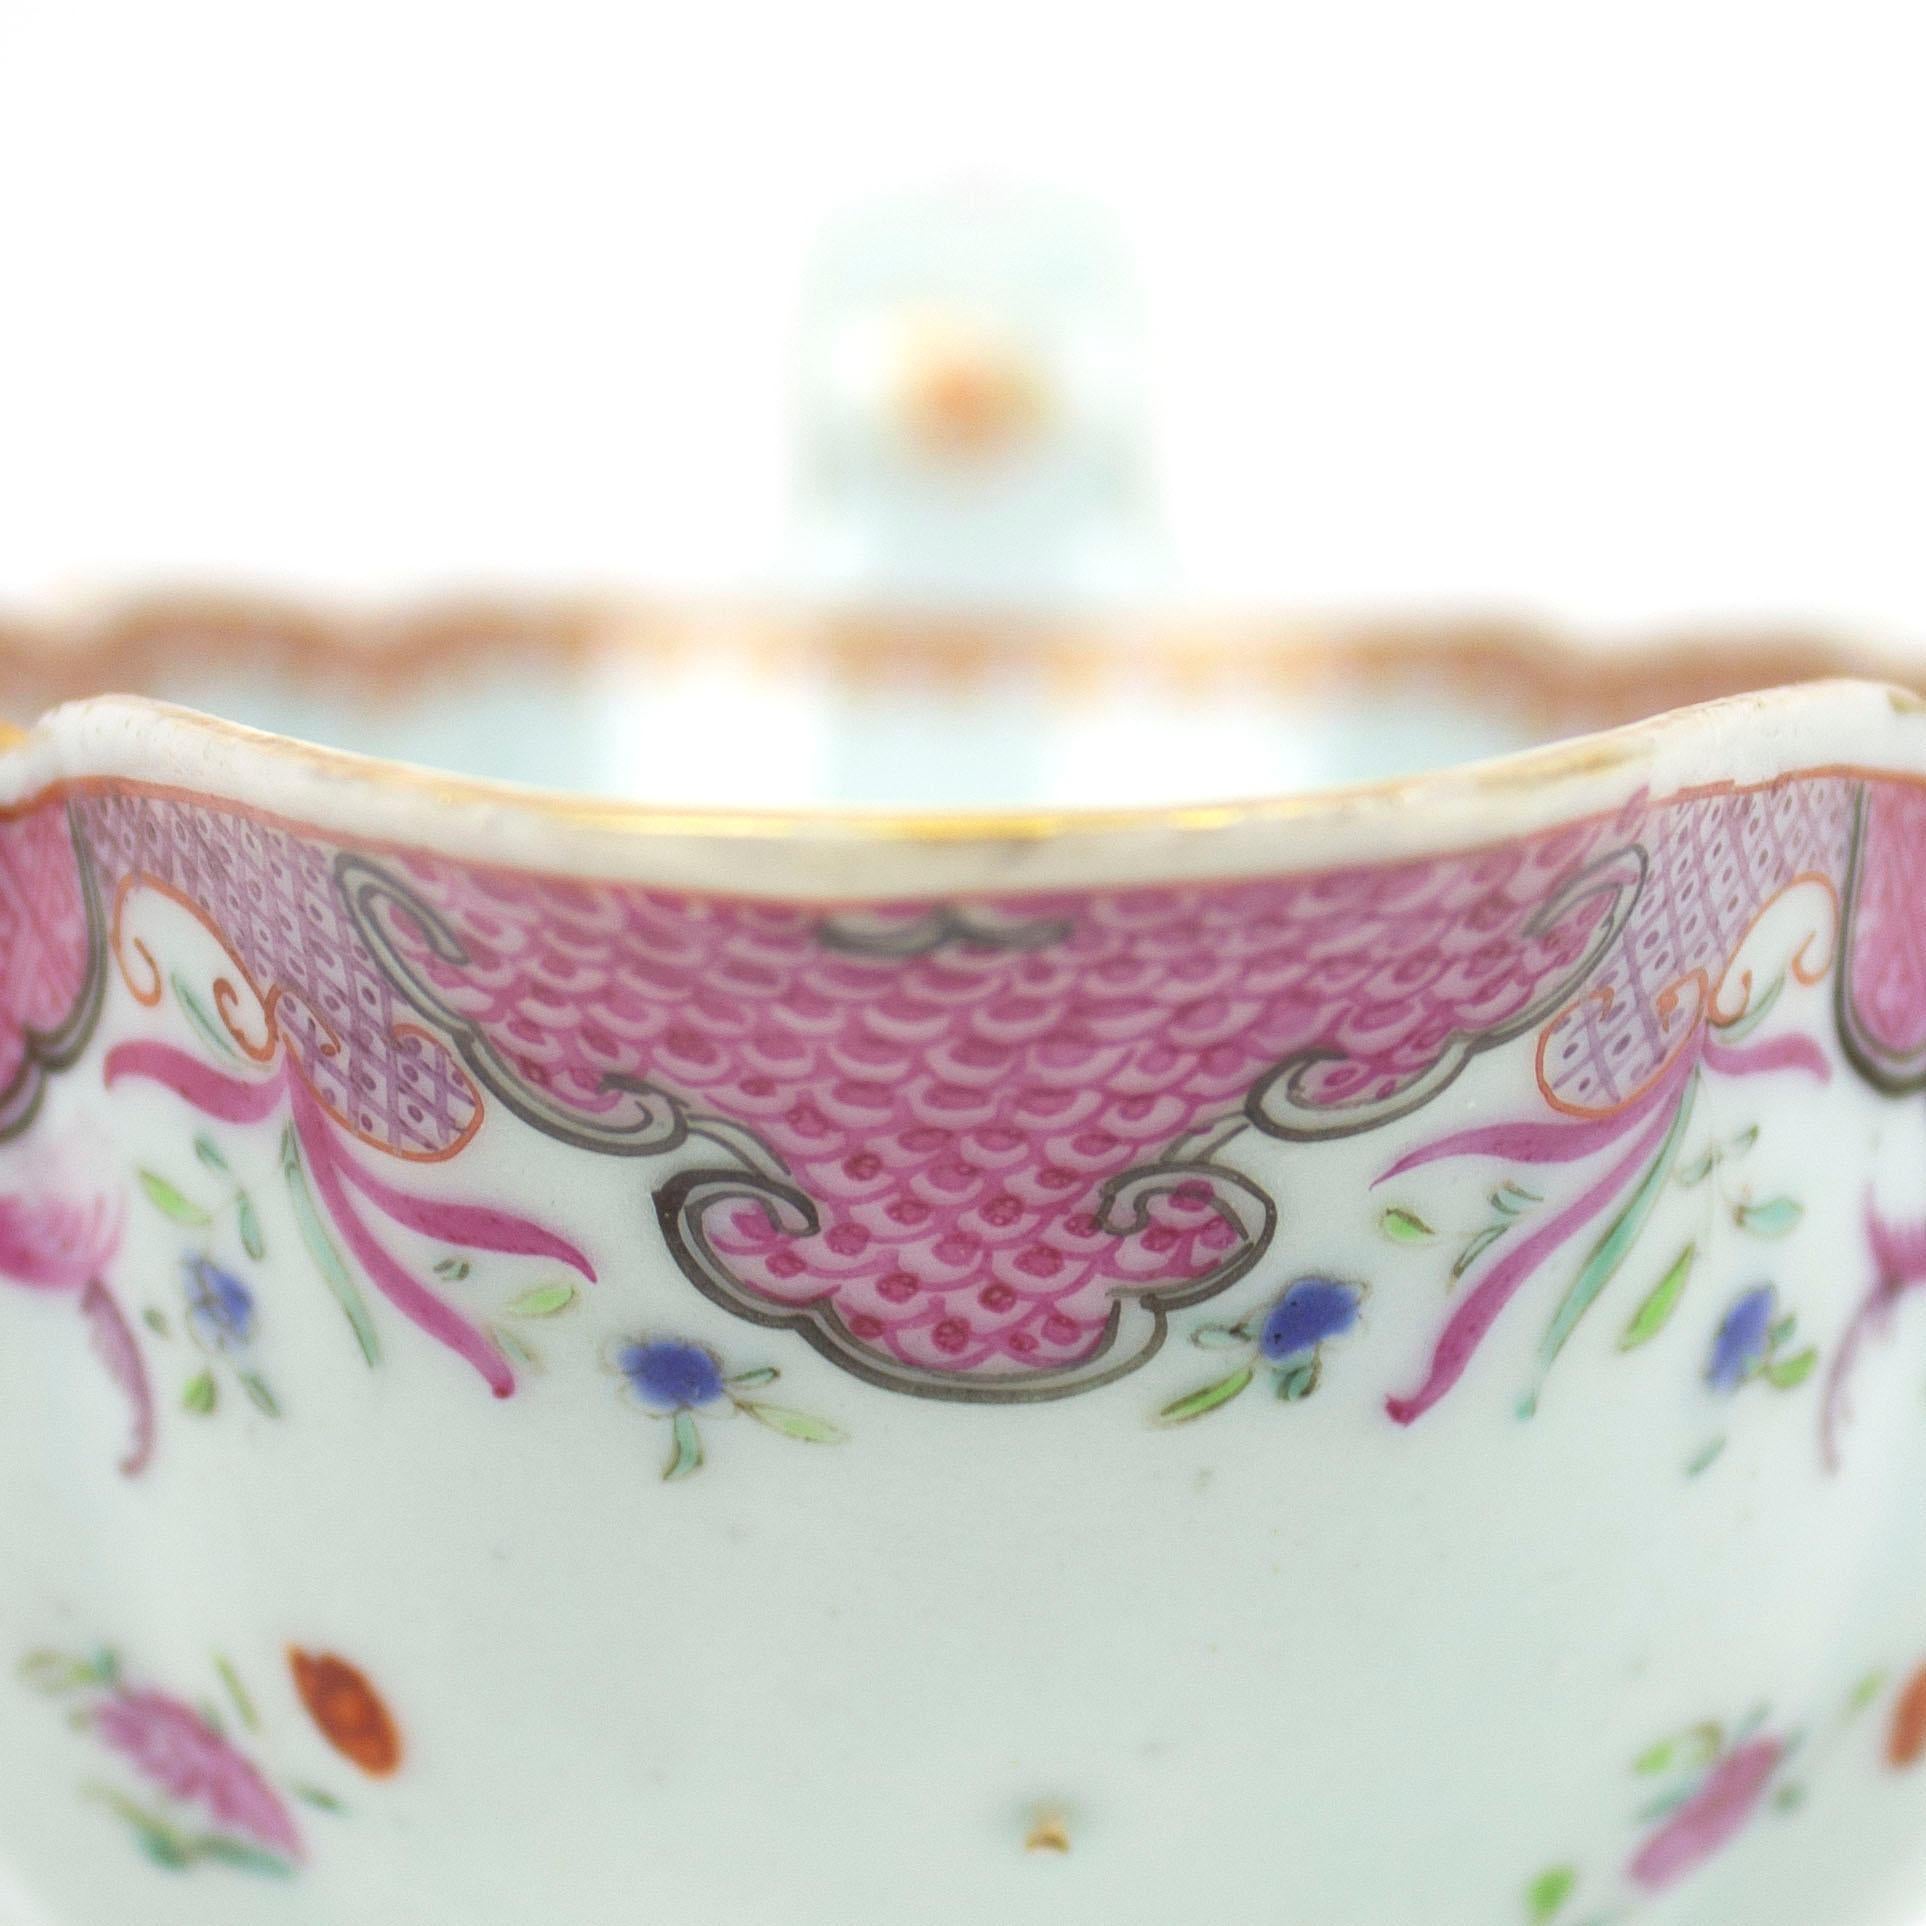 A Chinese export porcelain sauce boat from the Qianlong Period (1736-1795). Polychrome Famille Rose decoration depicting floral motif. The inside rim presents gilt tones representing arrow points.